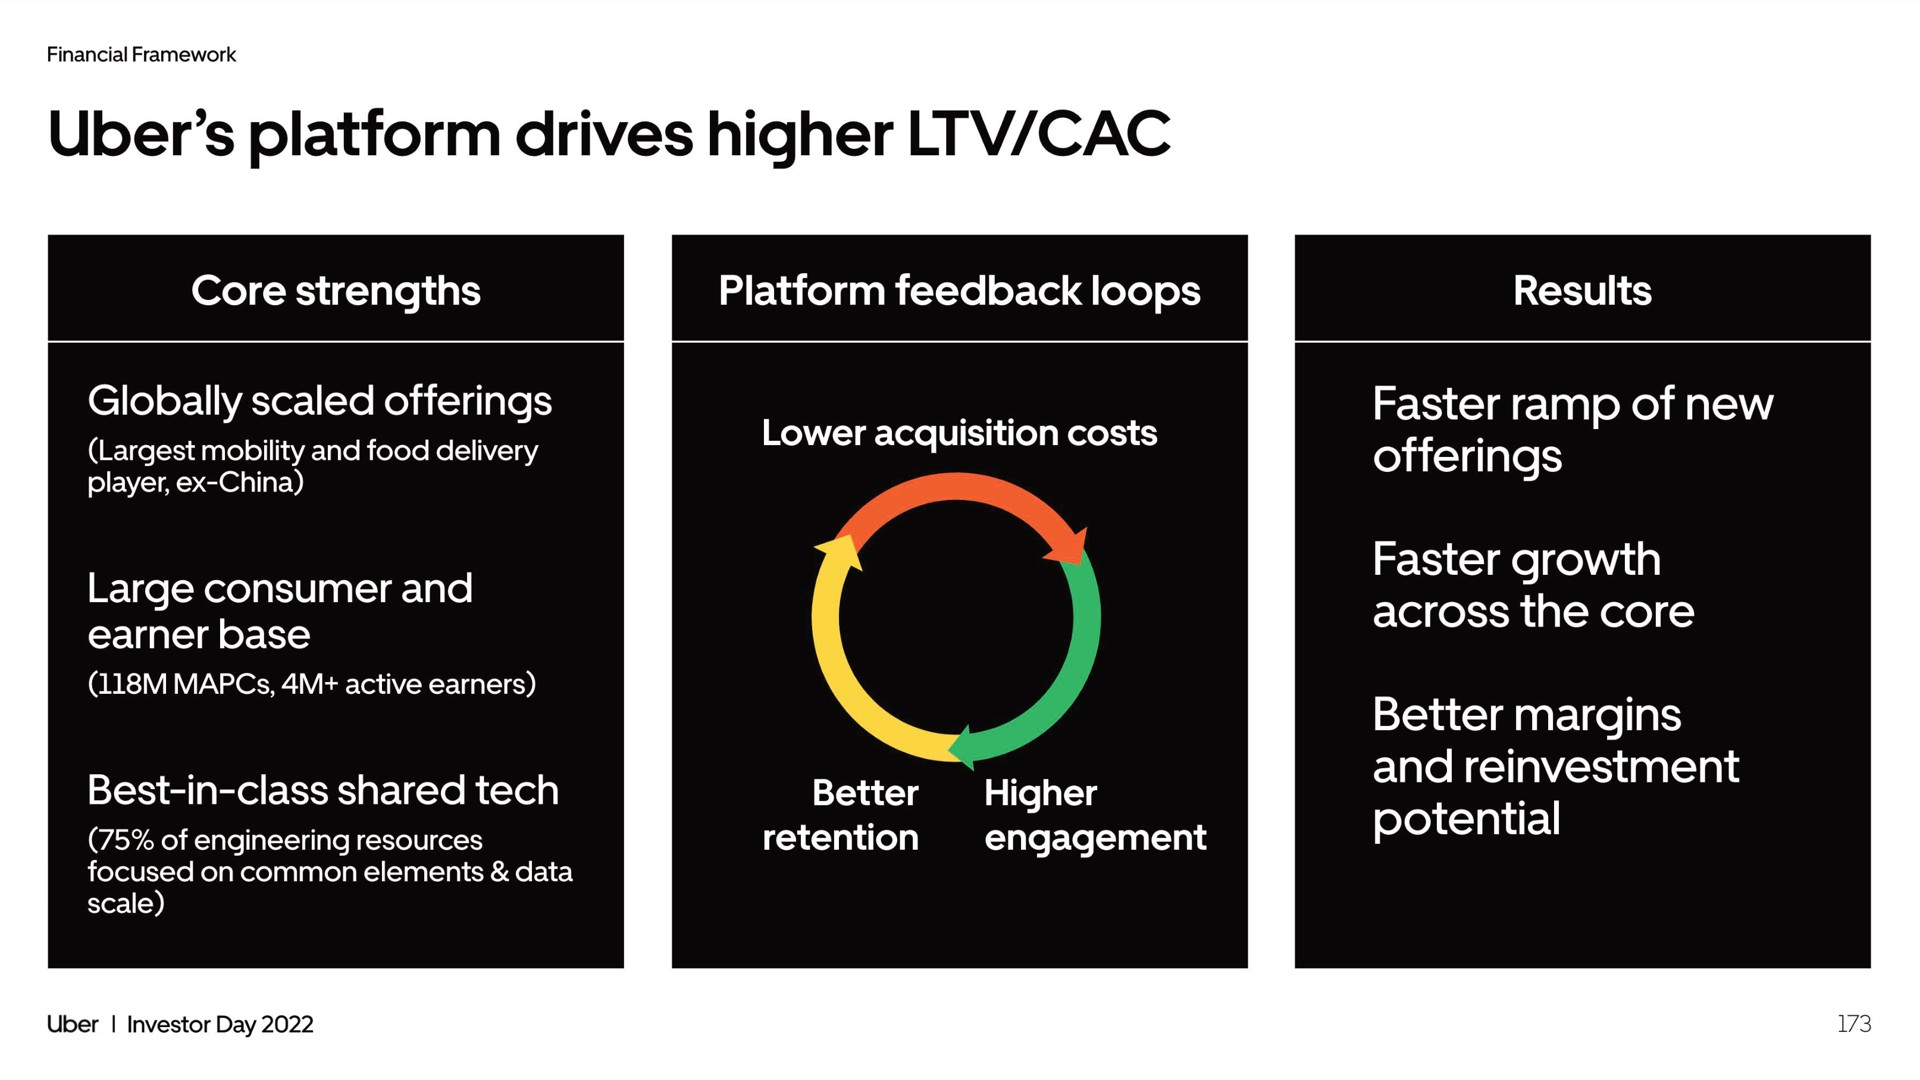 platform drives higher globally scaled offerings faster ramp of new faster growth better margins potential | Uber